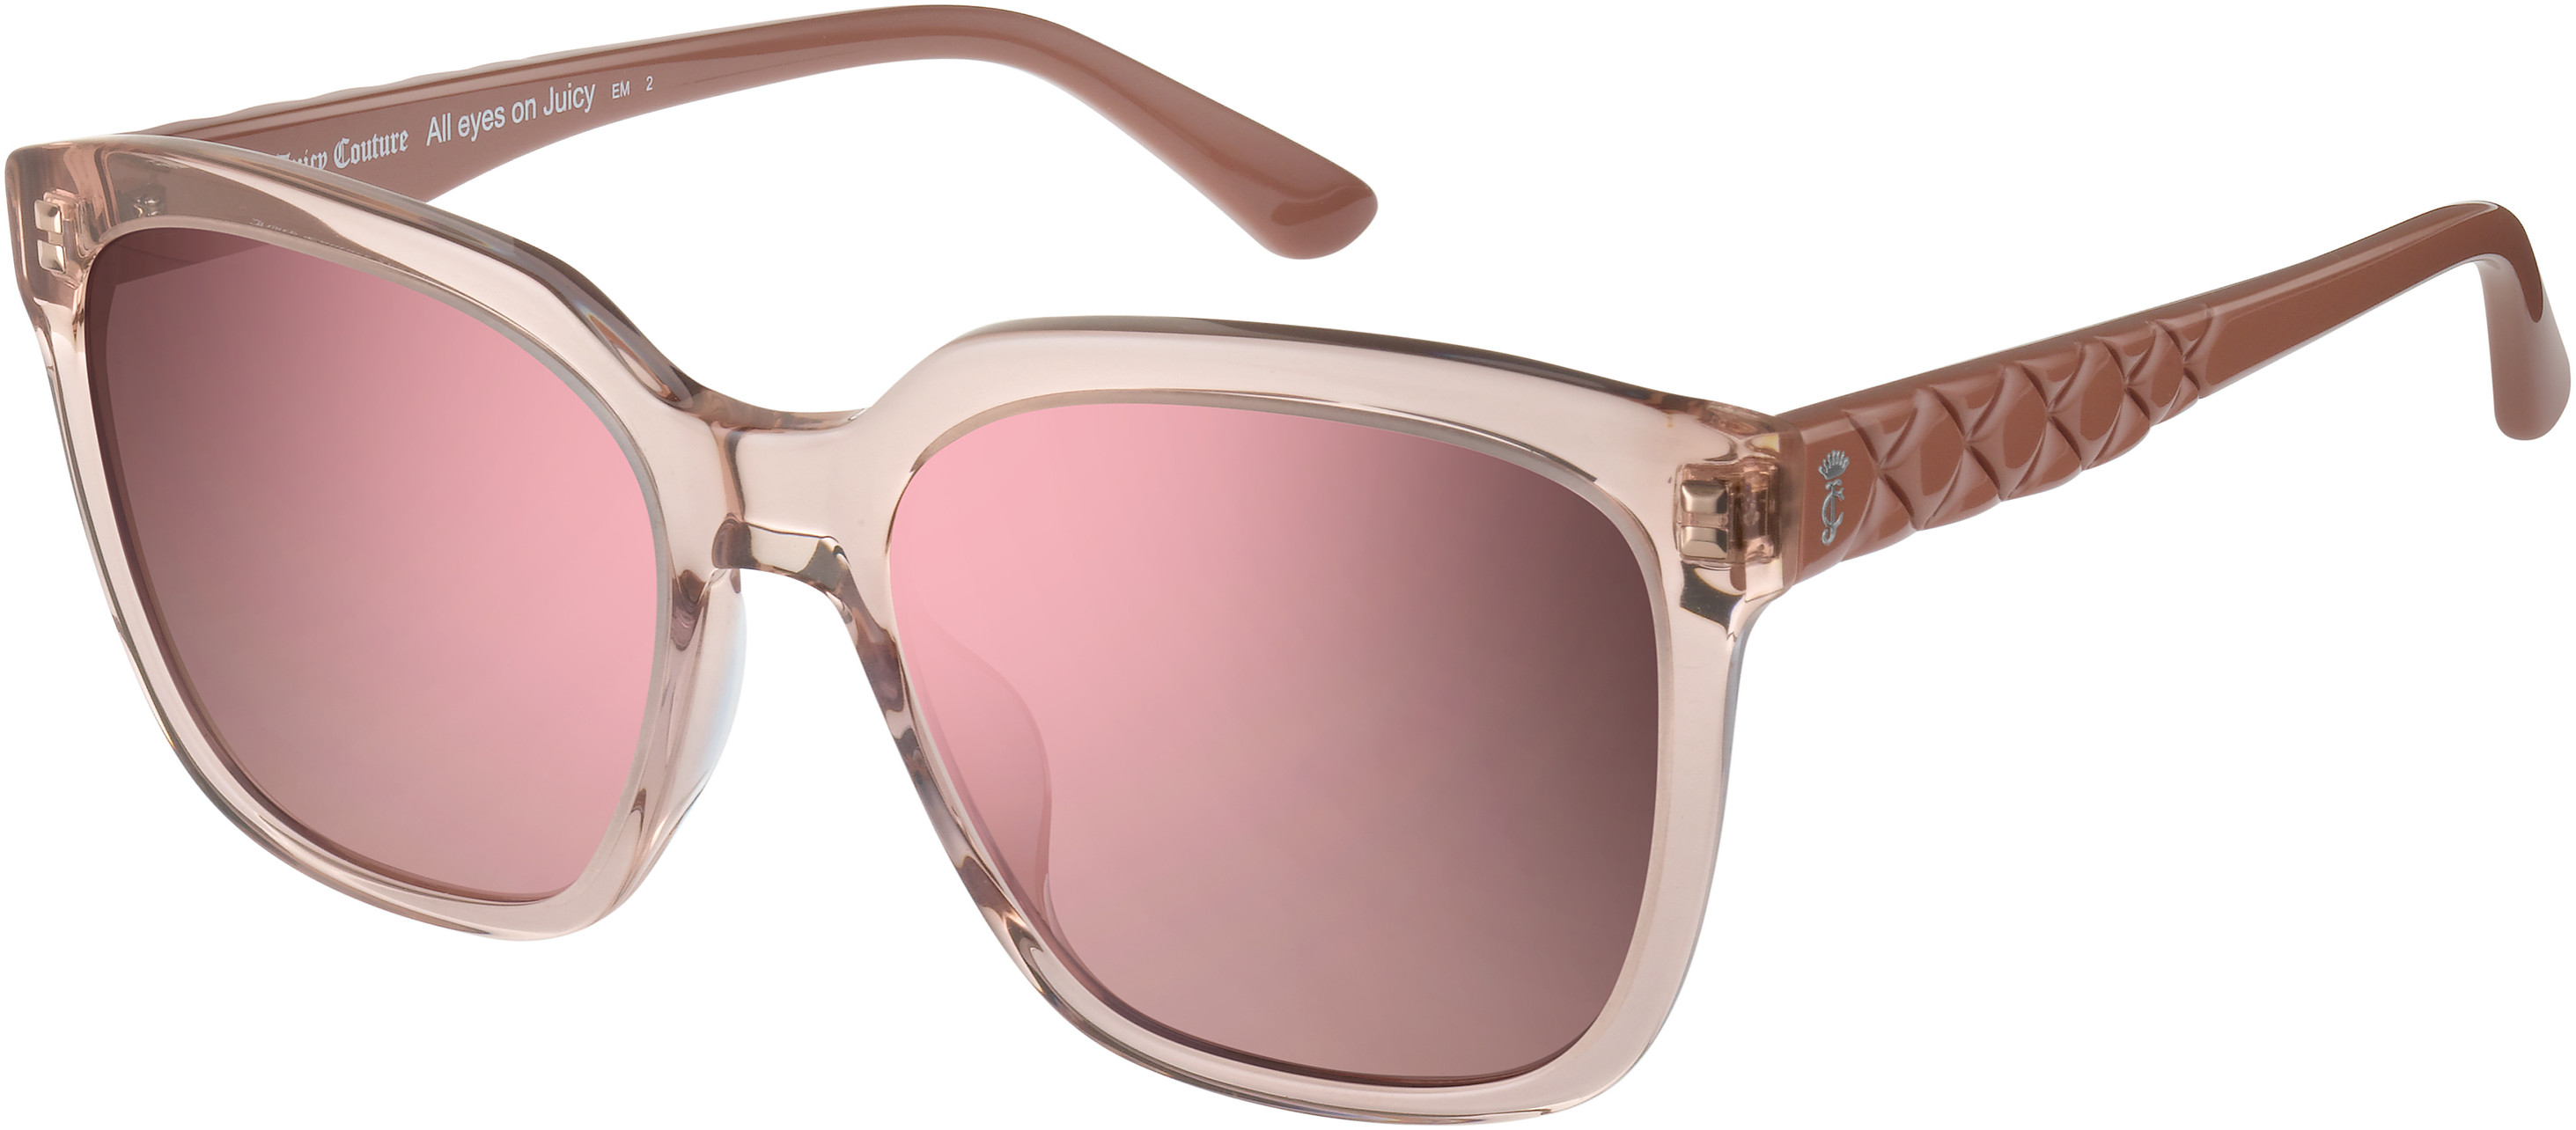 JUICY COUTURE 602